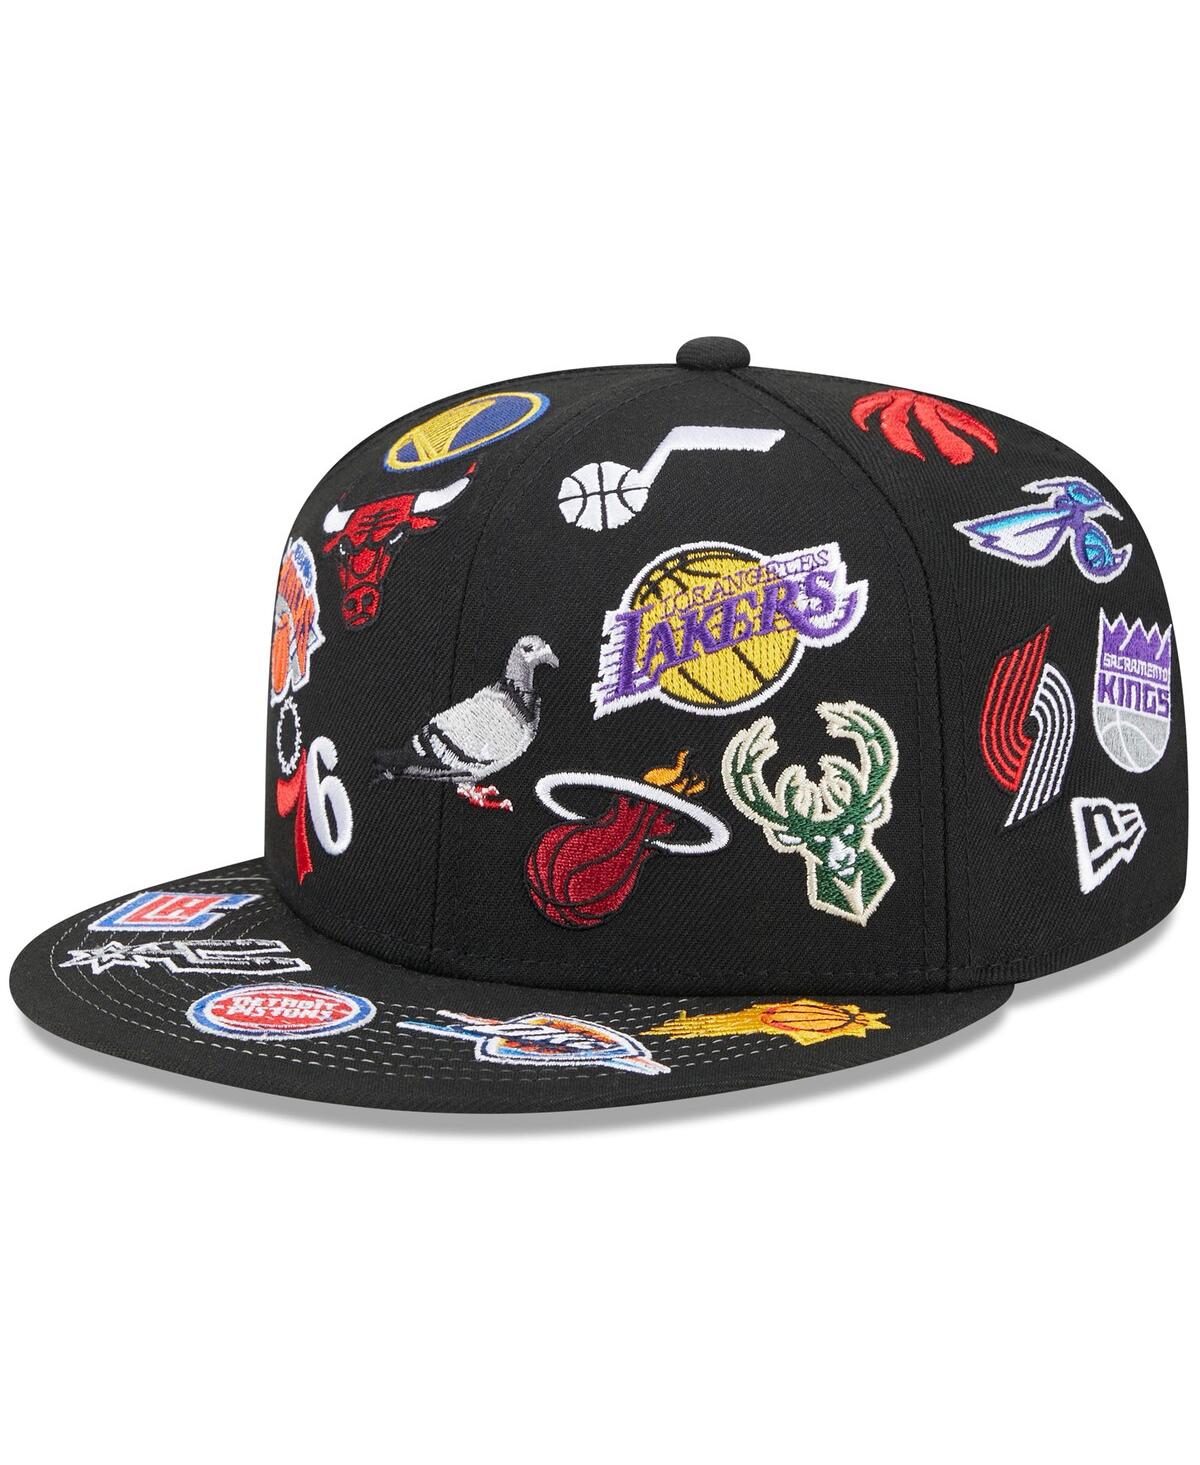 Shop Staple Men's New Era Black Nba X  59fifty Fitted Hat